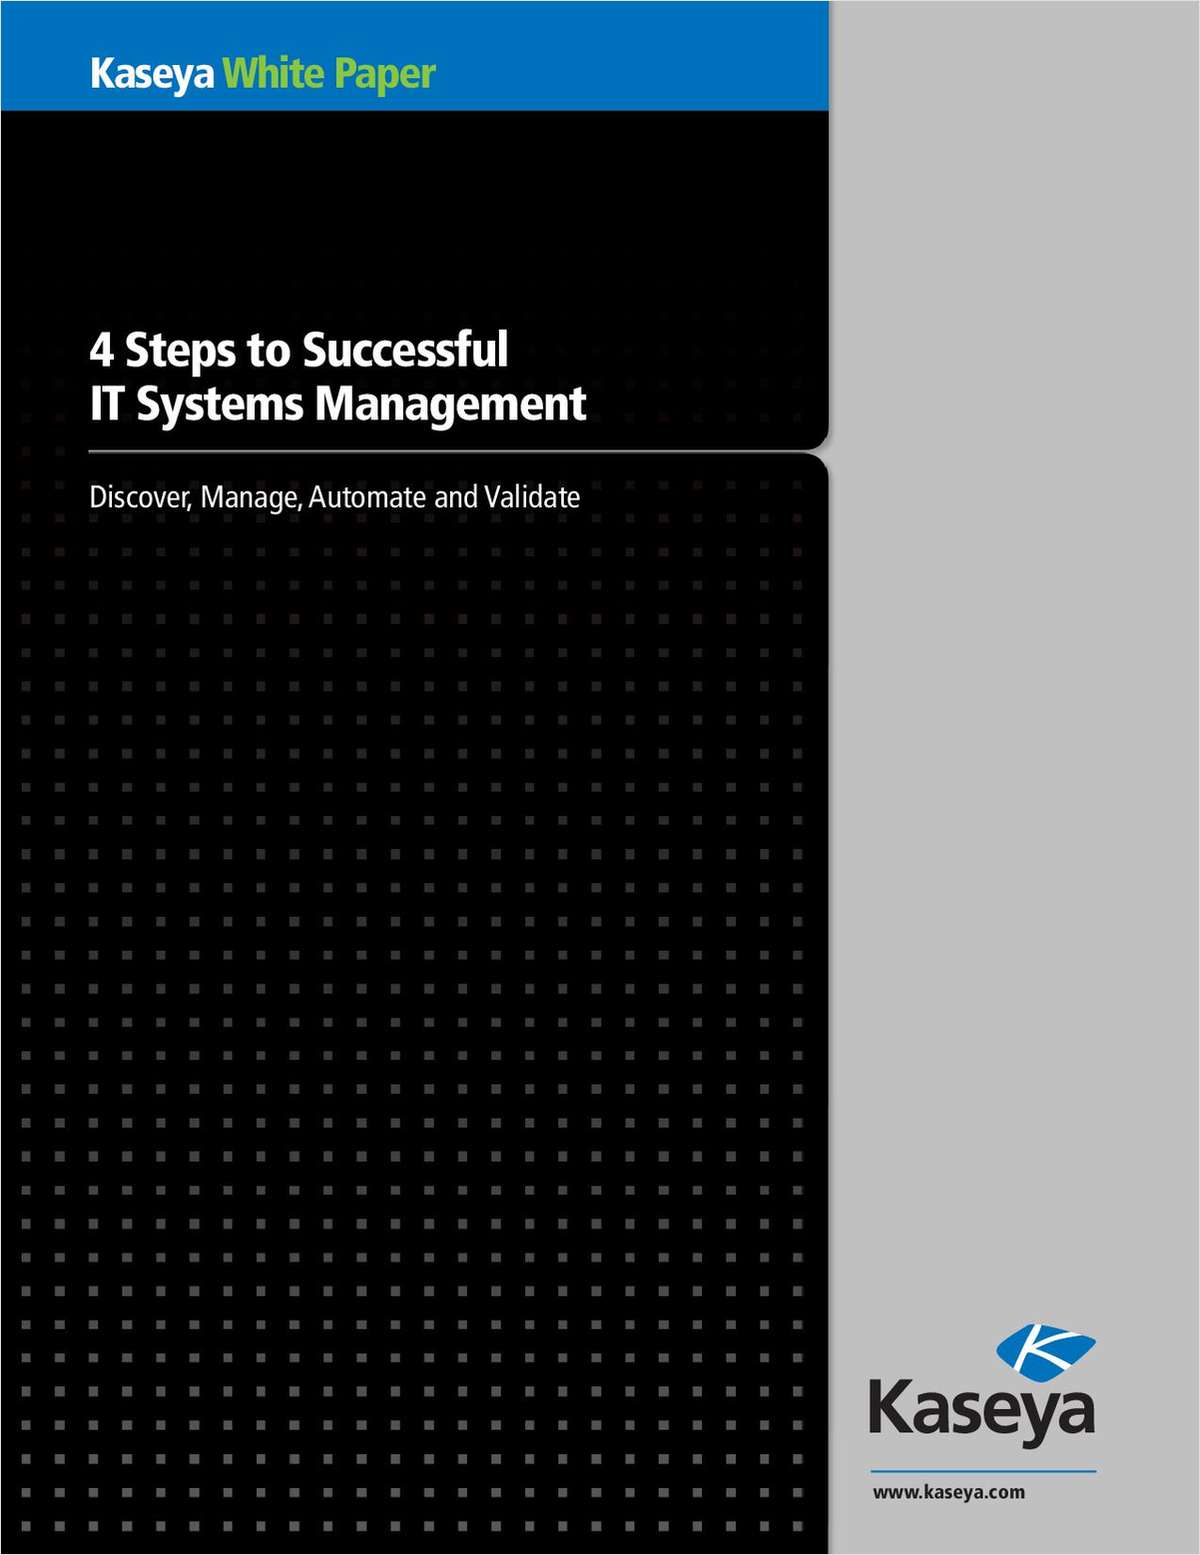 4 Steps to Successful IT Systems Management